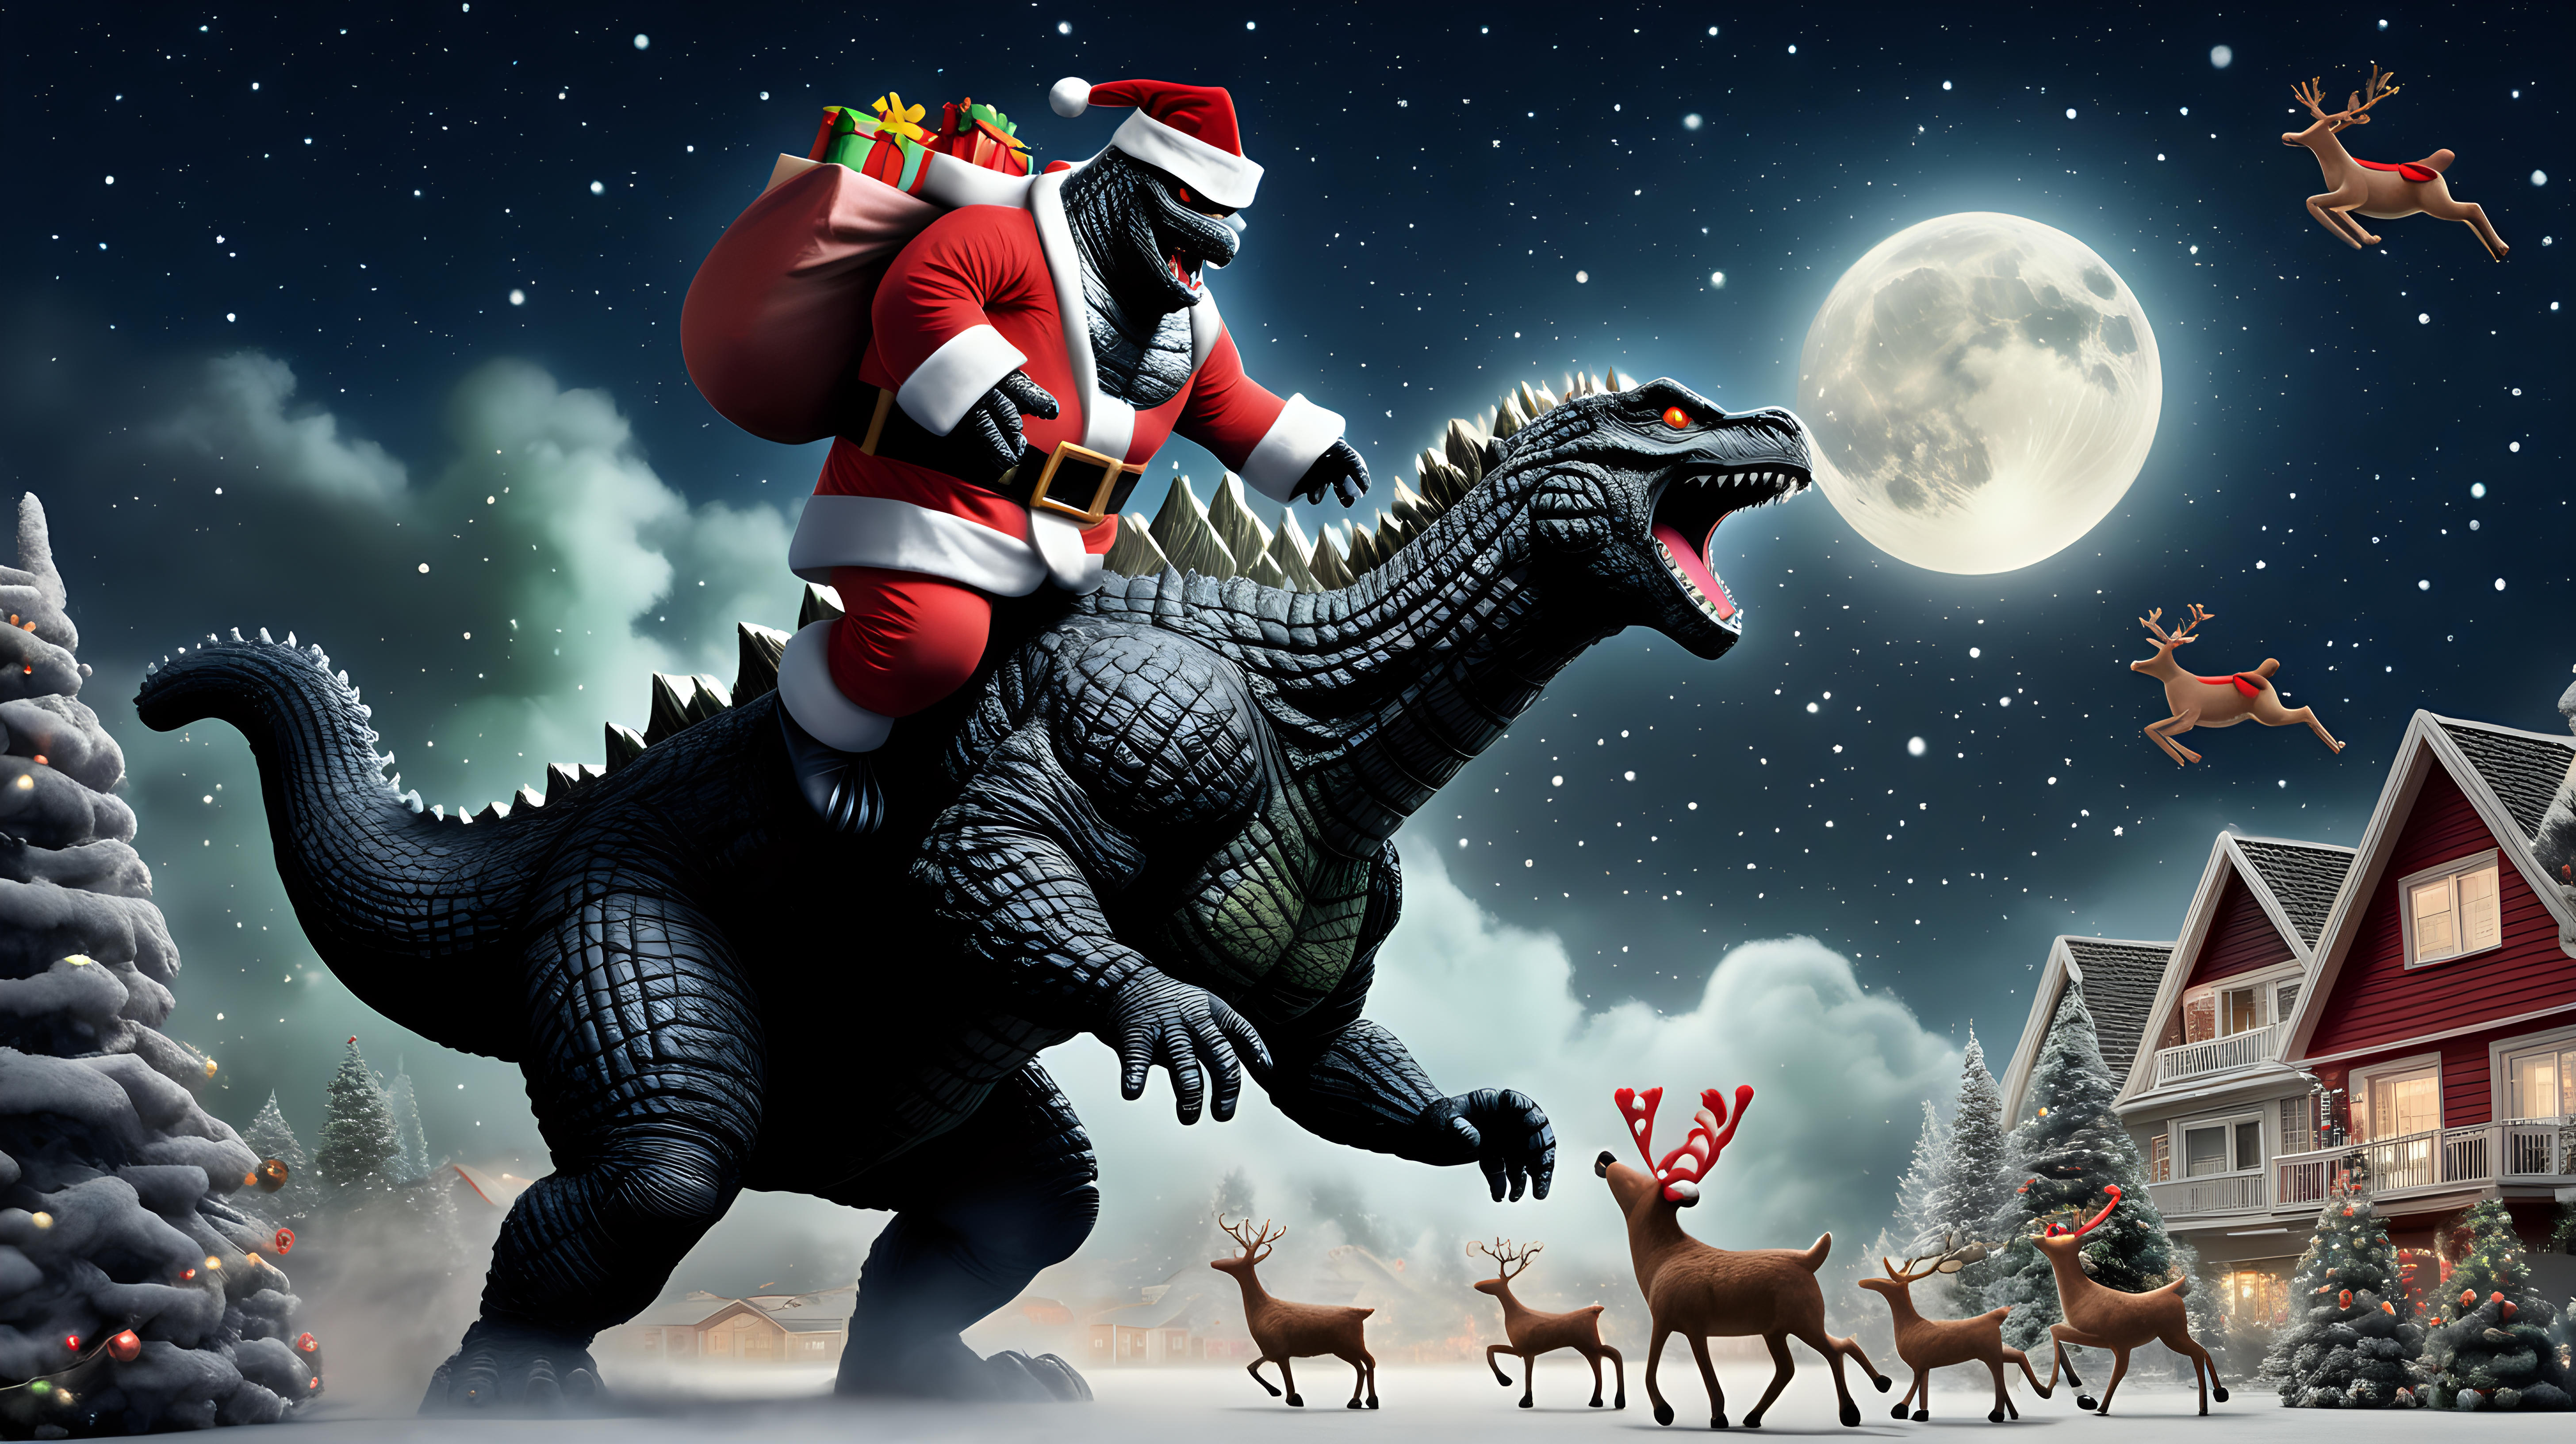 Godzilla chasing Santa and his reindeer                                                in the night sky